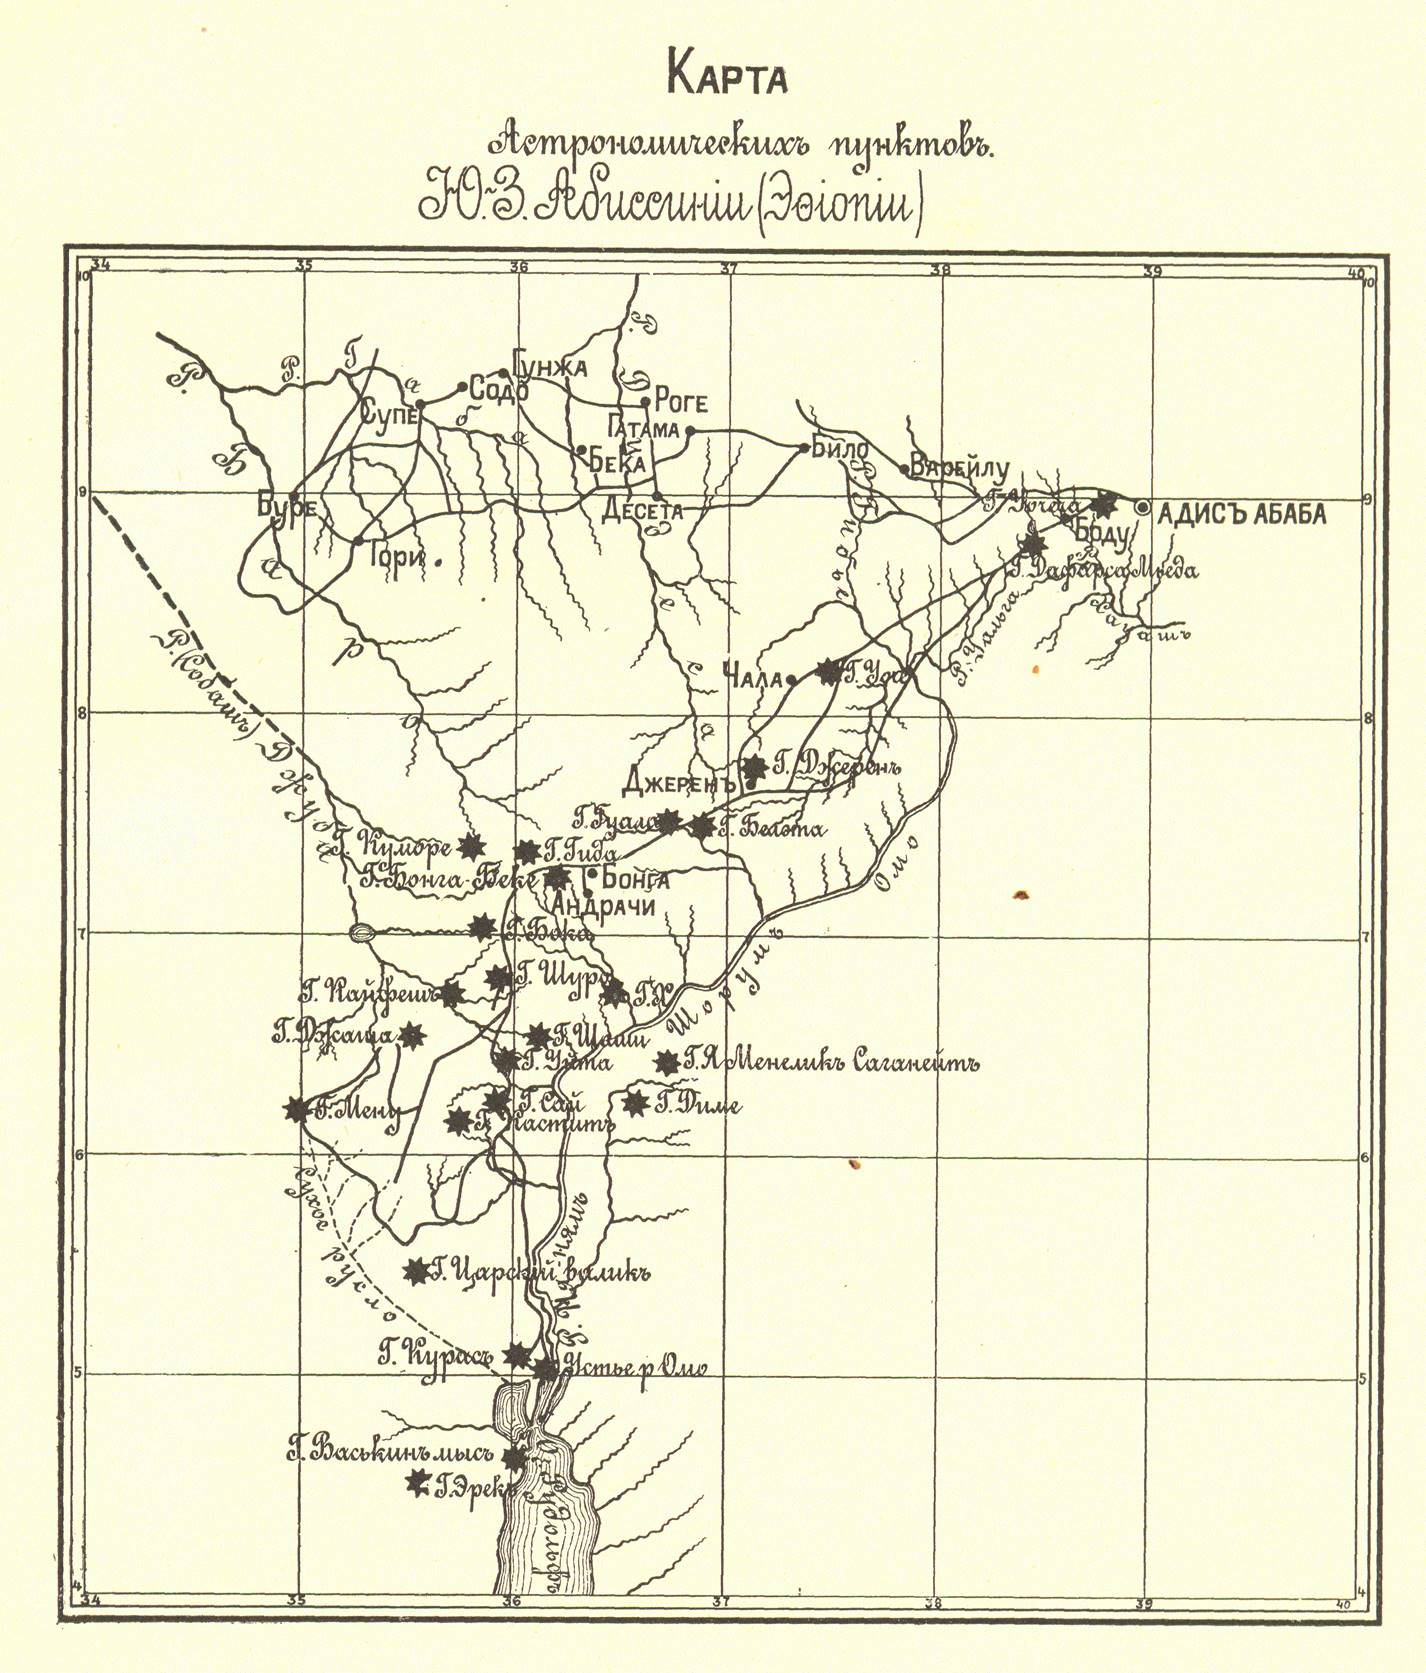 http://www.seltzerbooks.com/bulatovichphotos/maps/map%20of%20astronomical%20points%20of%20Abyssinia.jpg